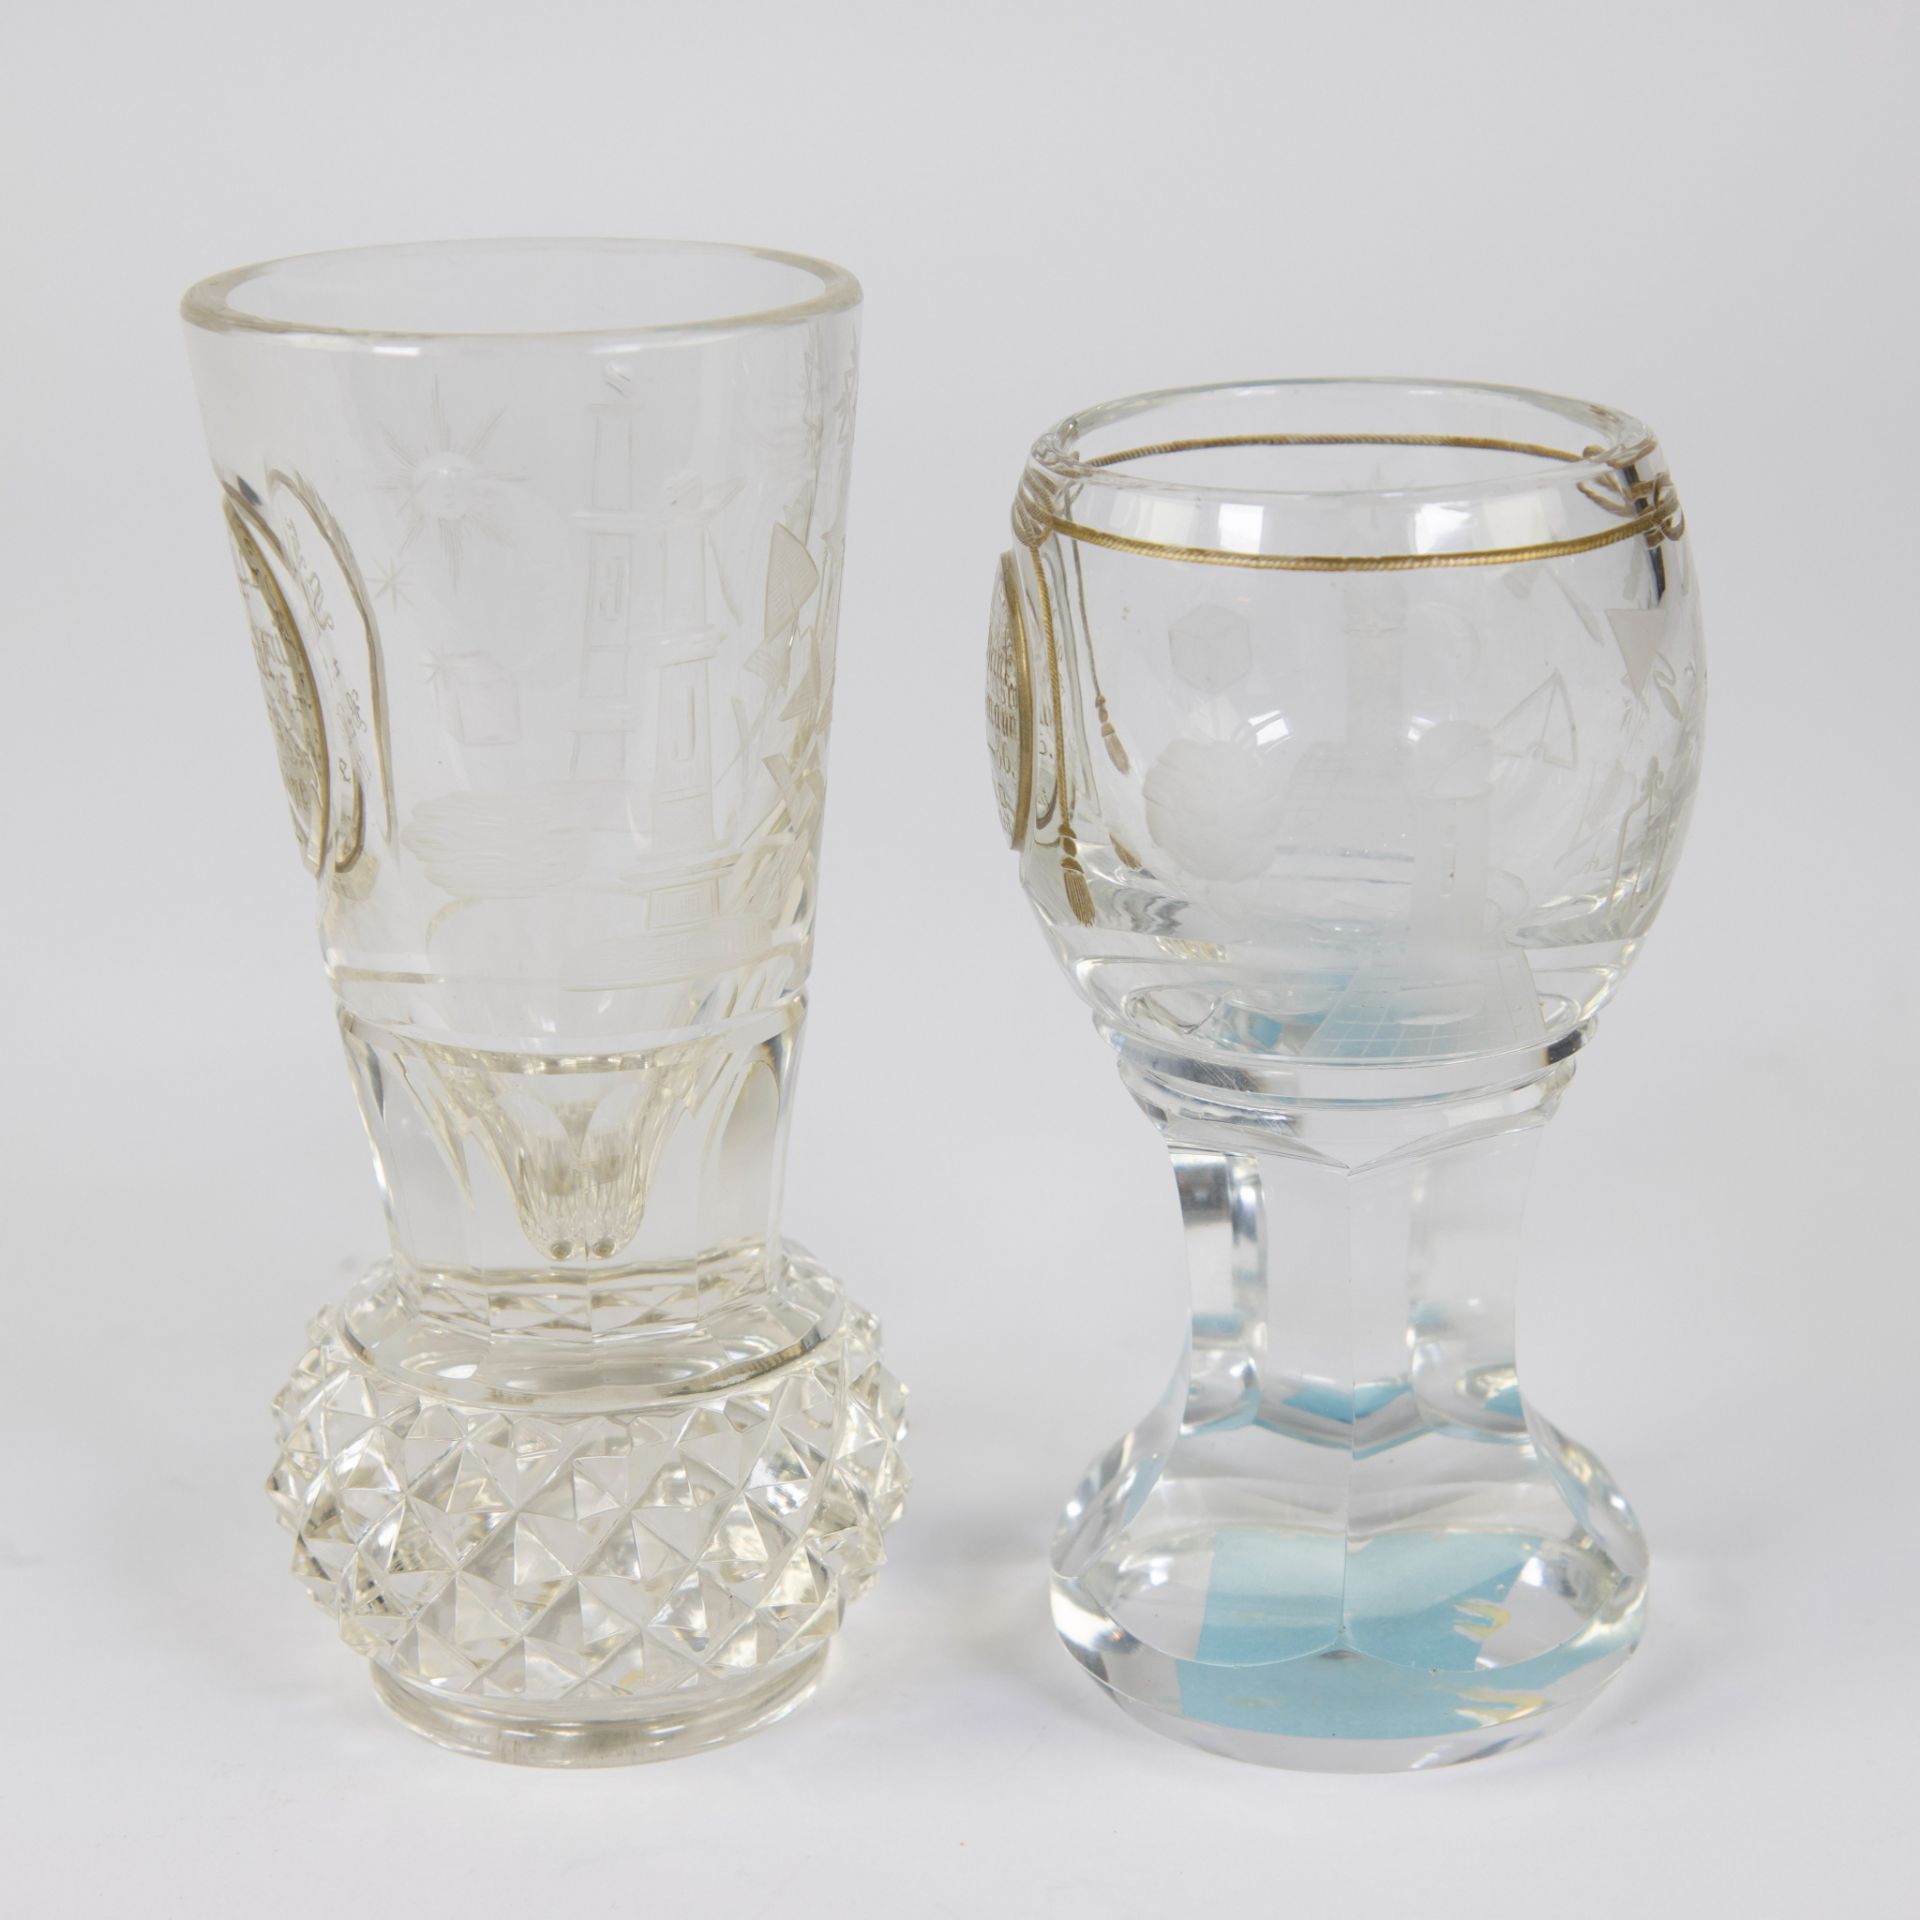 2 heavy crystal glasses with gold decoration of Freemasonry, 19th/20th century - Image 2 of 4